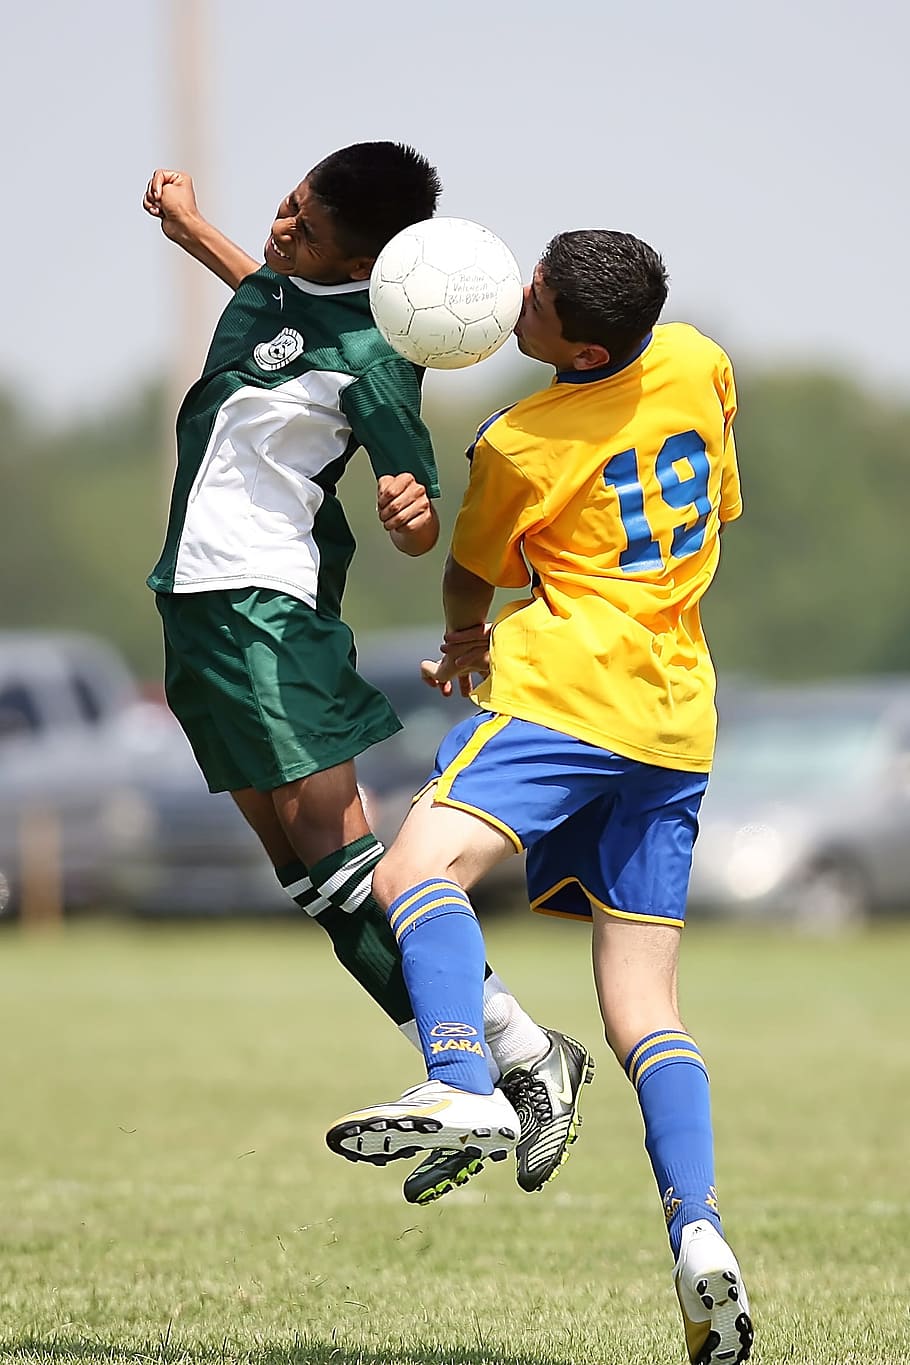 two soccer players heading a soccer ball in field, Football, Conflict